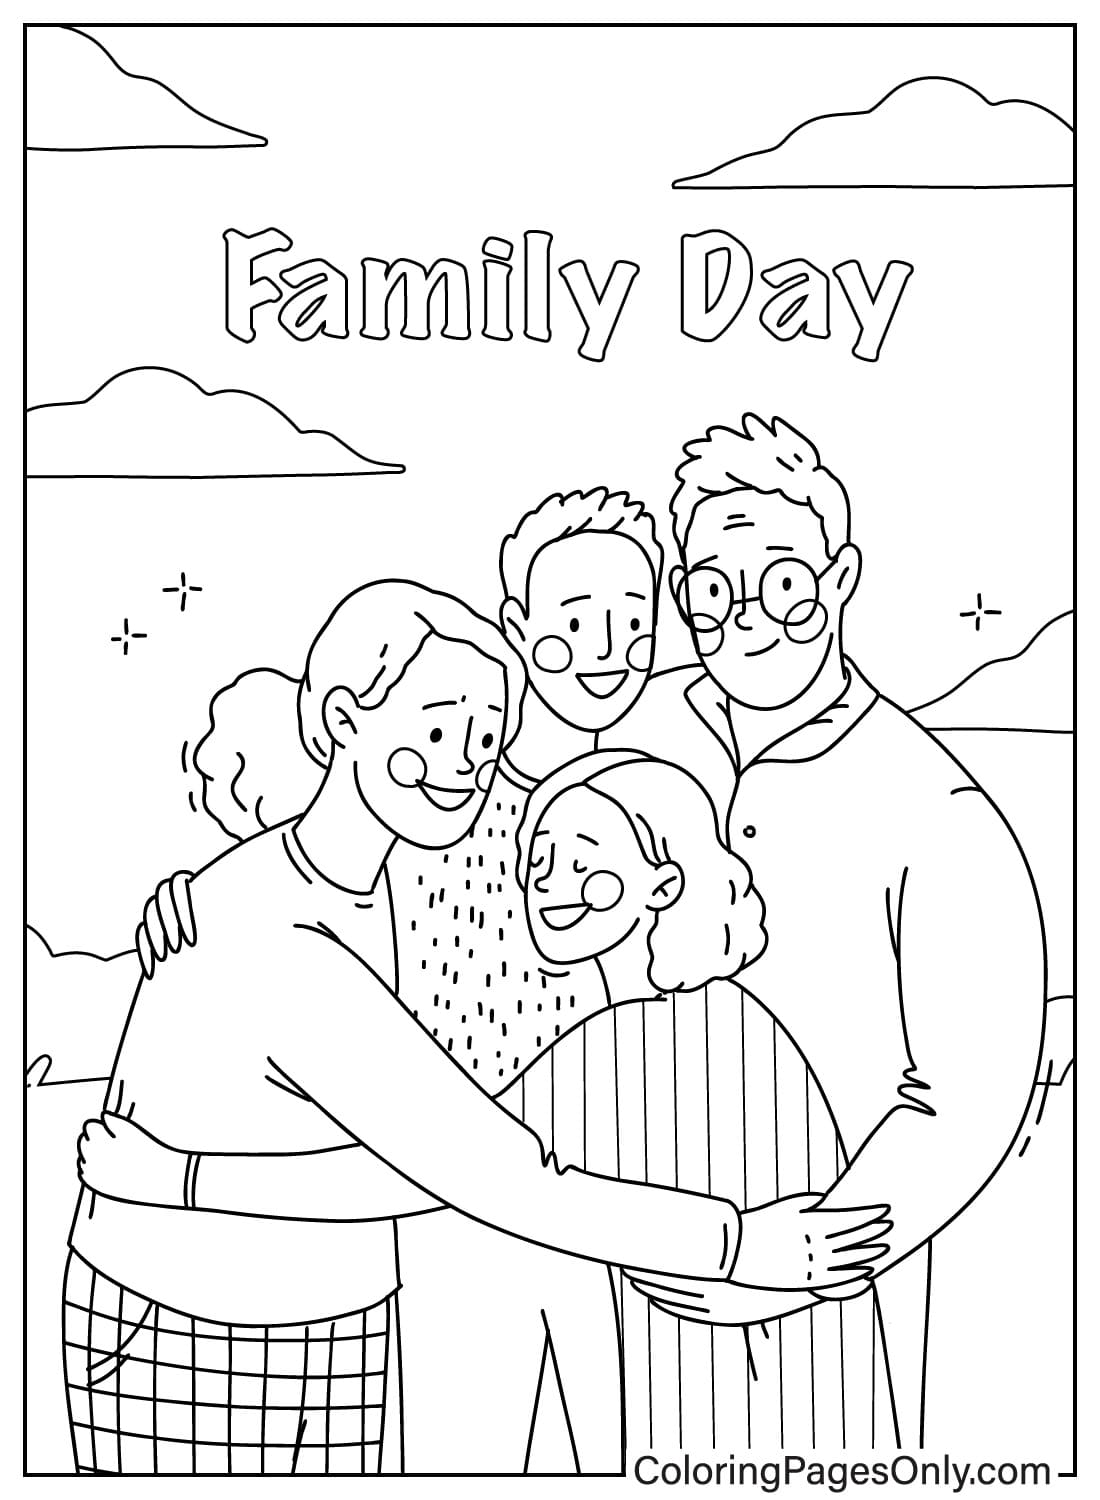 Images Family Day Coloring Page from Family Day